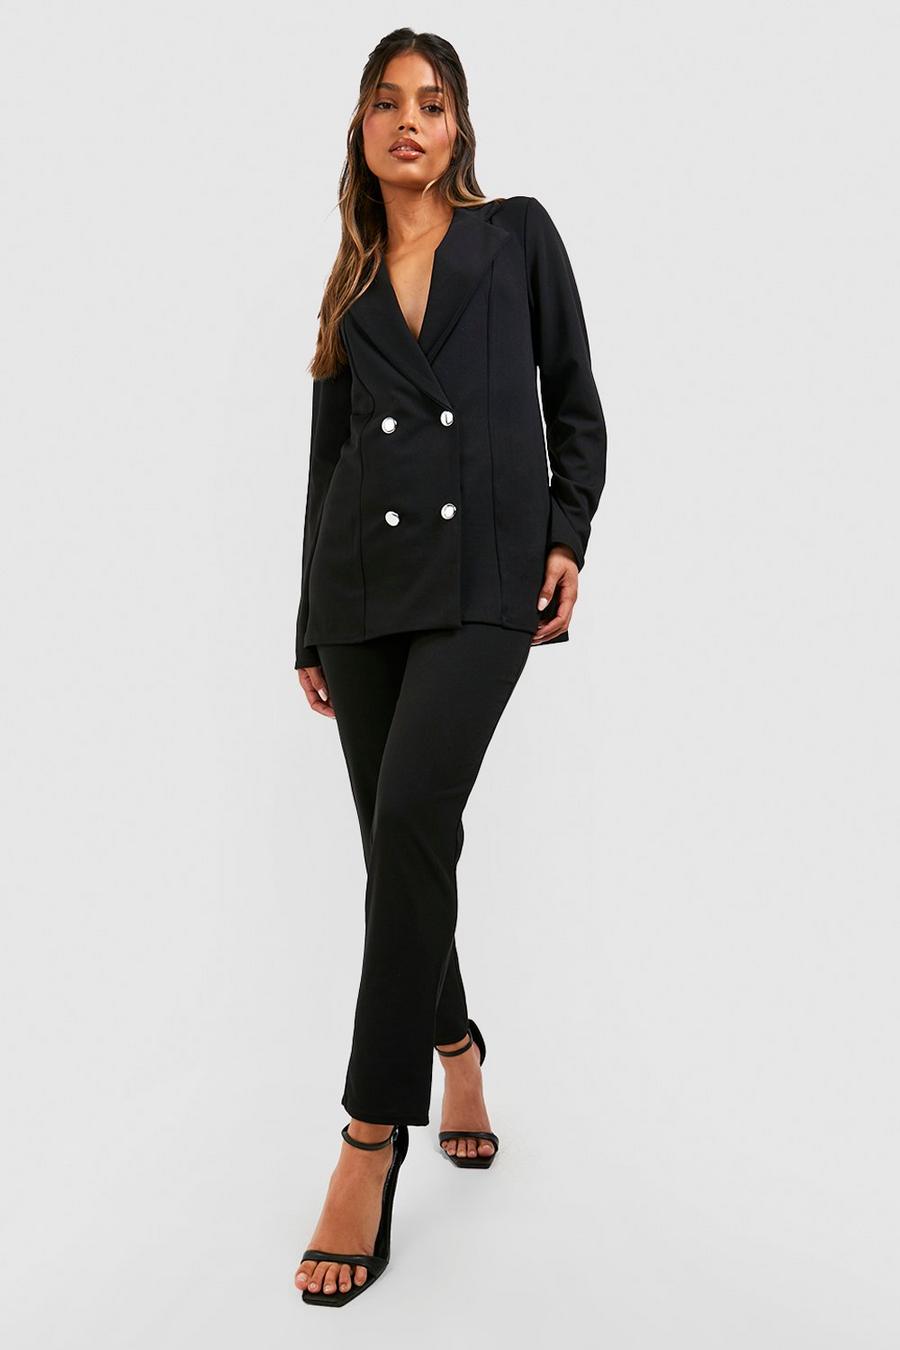 Black Double Breasted Blazer And Trouser Suit Set